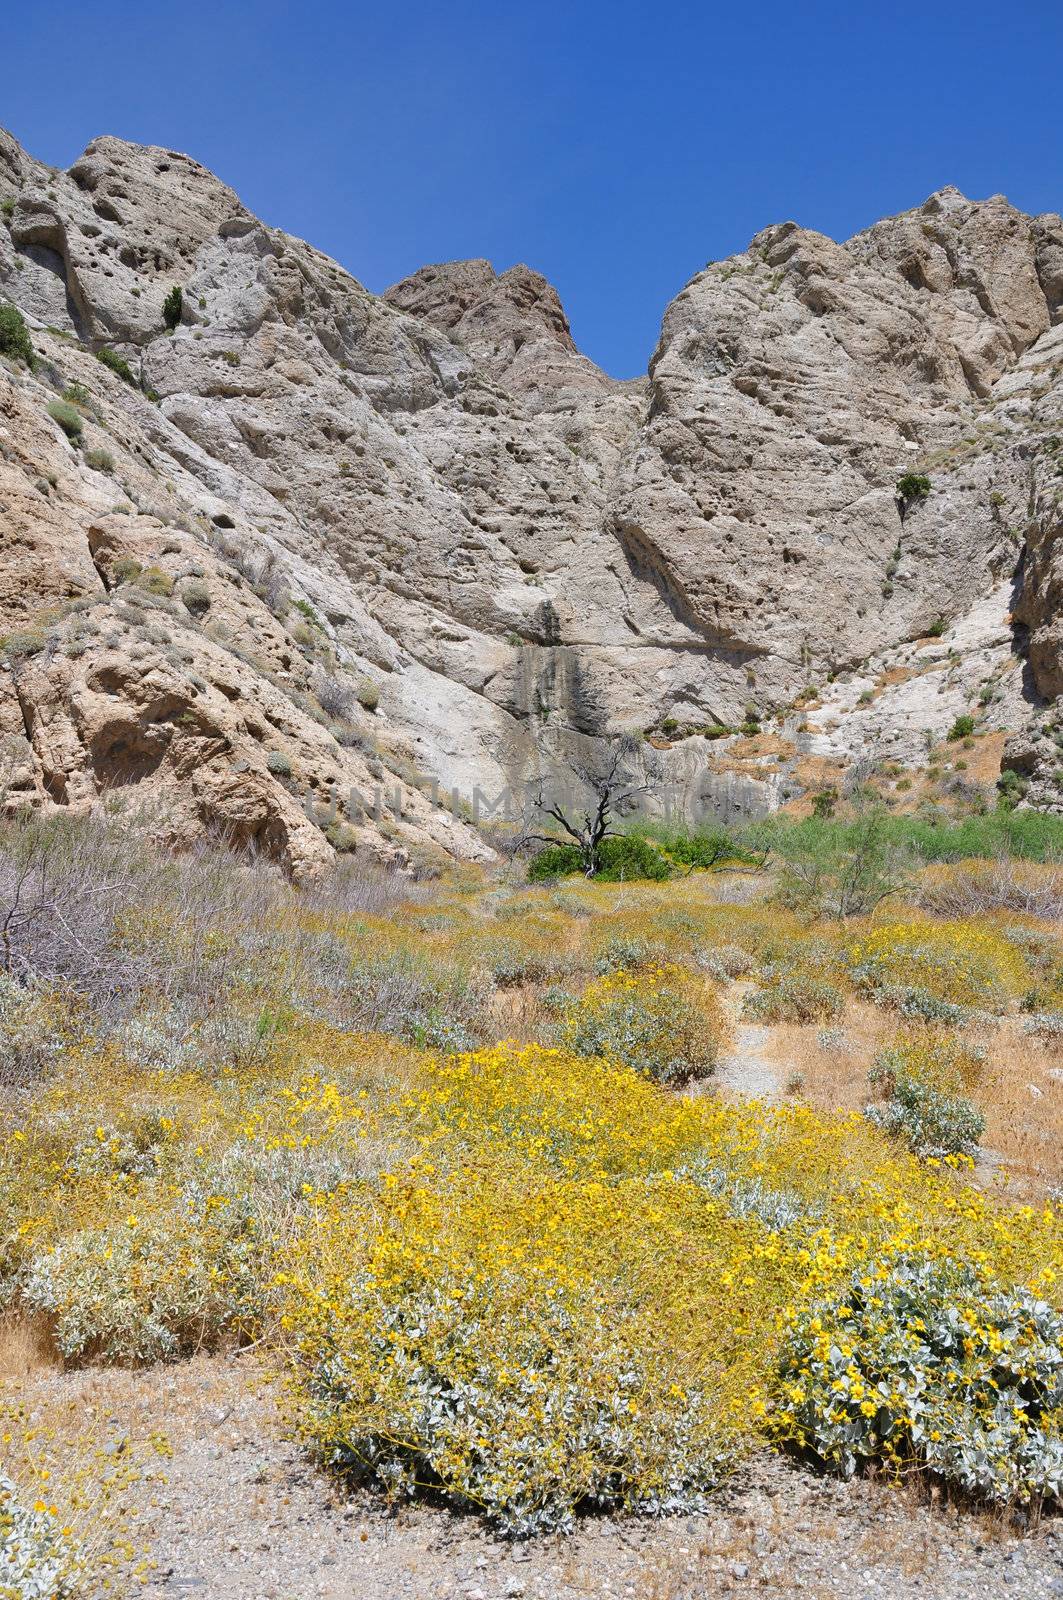 Wildflowers grow in Whitewater Canyon Preserve near the desert town of Palm Springs, California.